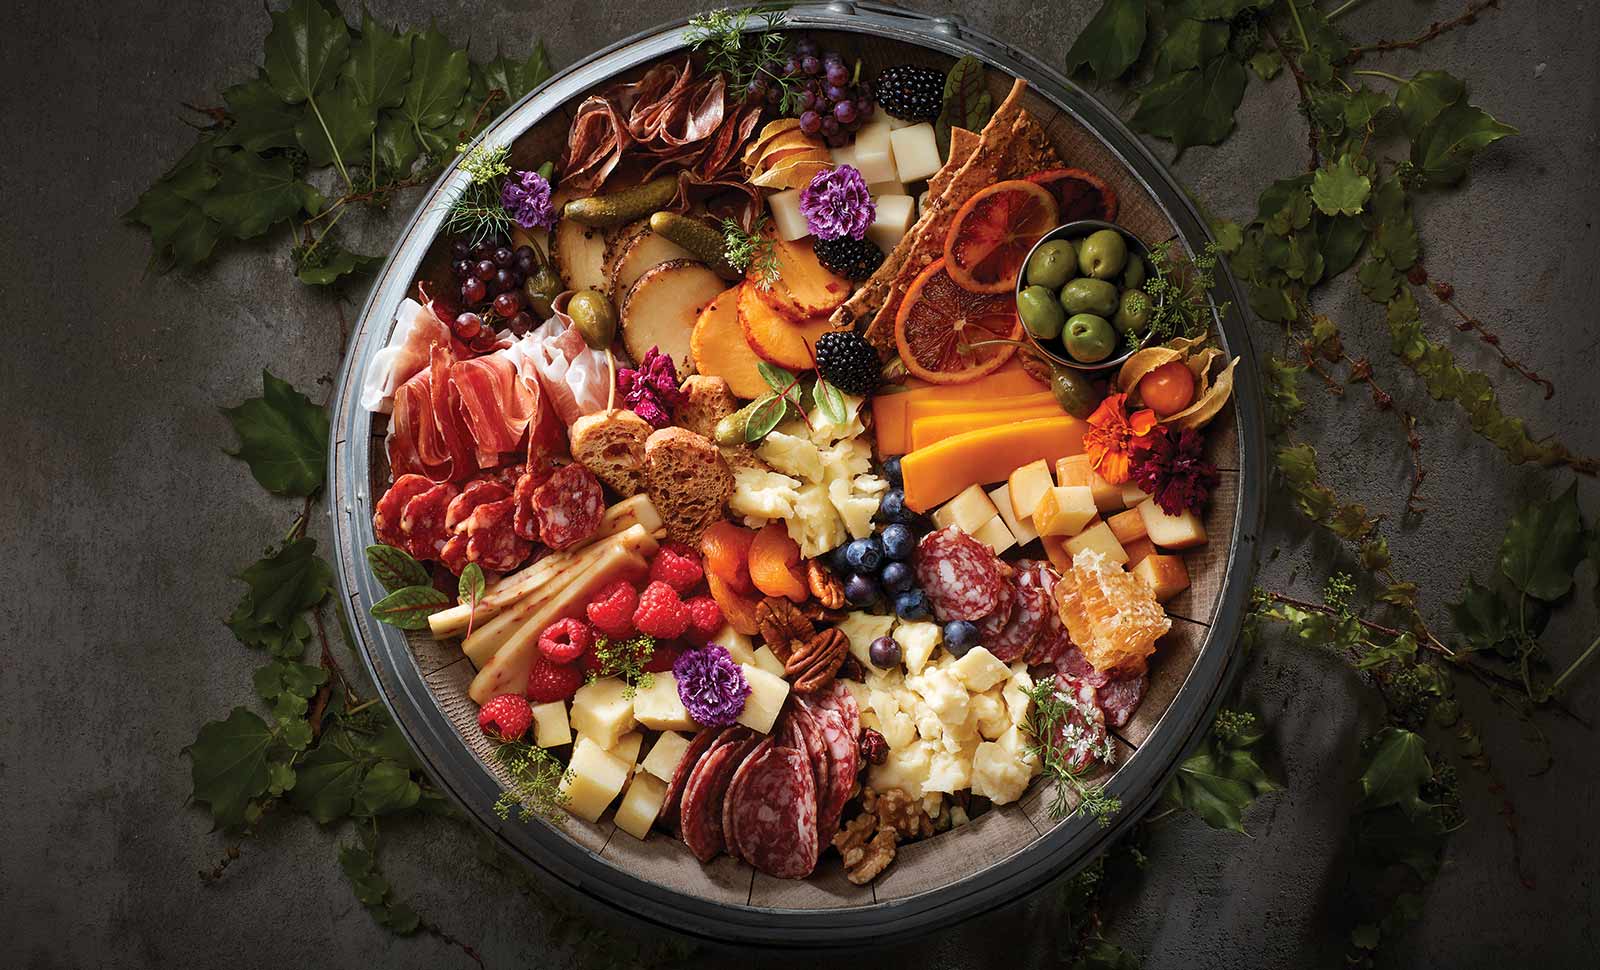 A wooden barrel topped with an assortment of cheeses, meats, fruits and breads